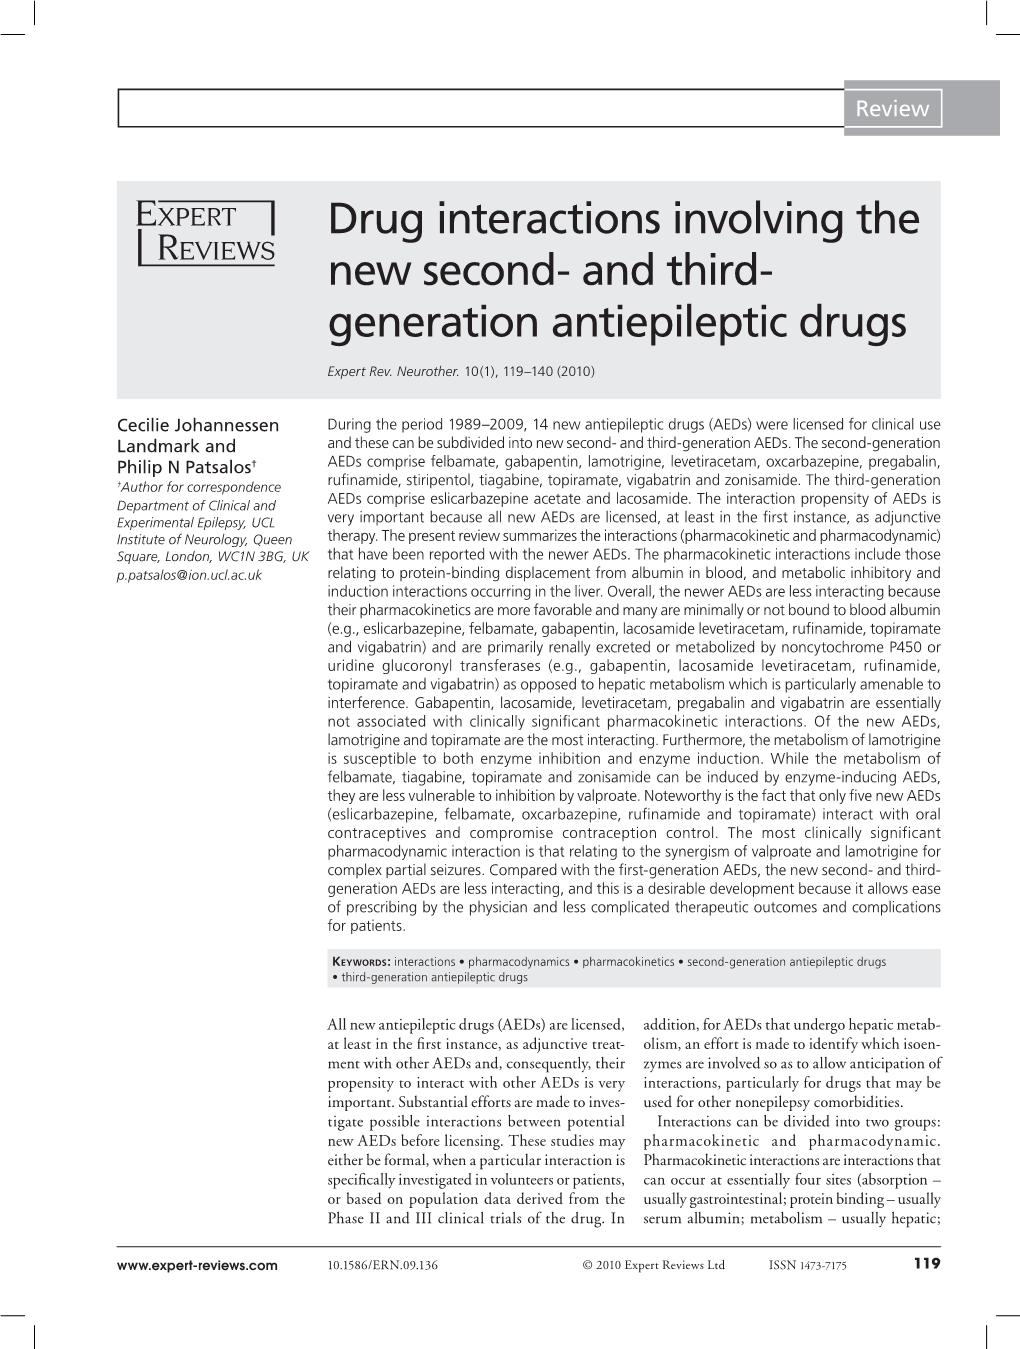 Drug Interactions Involving the New Second- and Third- Generation Antiepileptic Drugs